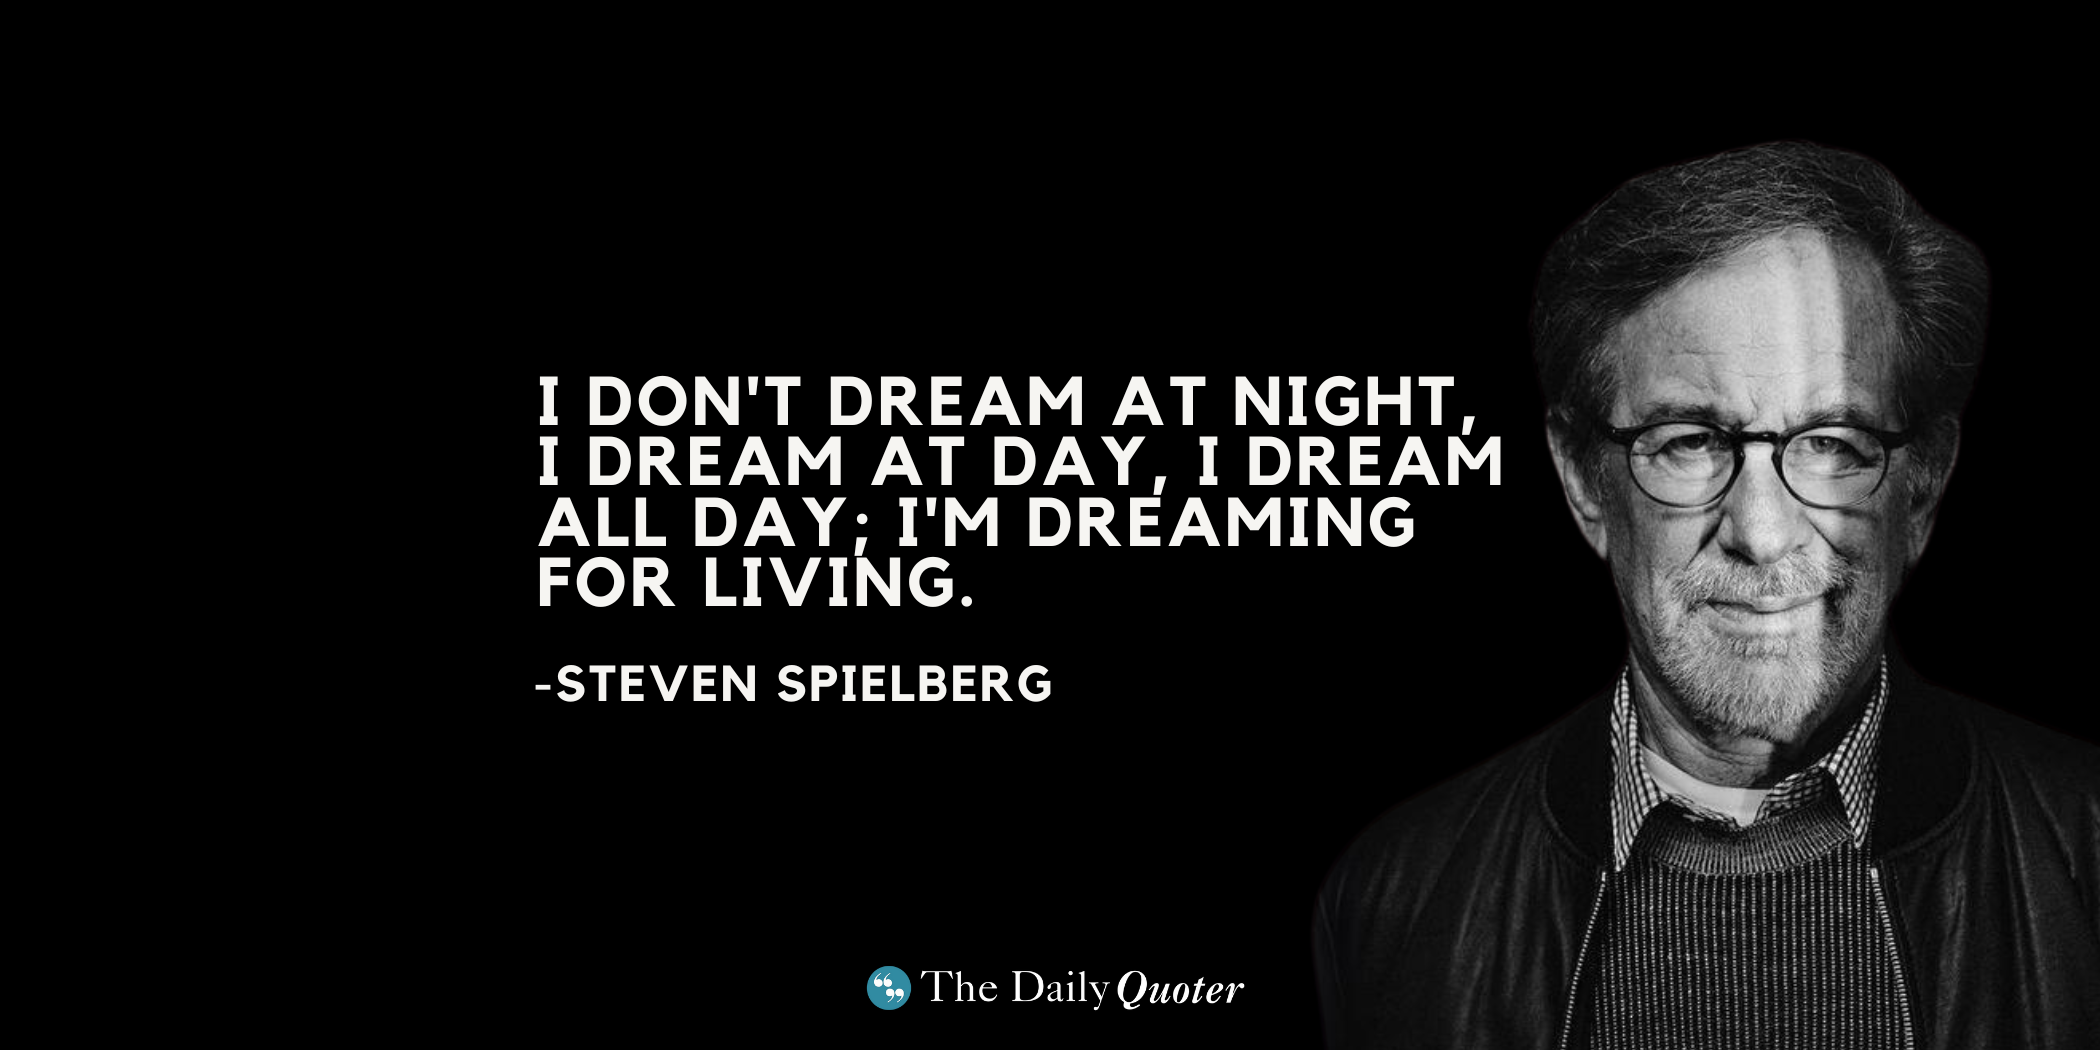 I don't dream at night, I dream at day, I dream all day; I'm dreaming for living. – Steven Spielberg